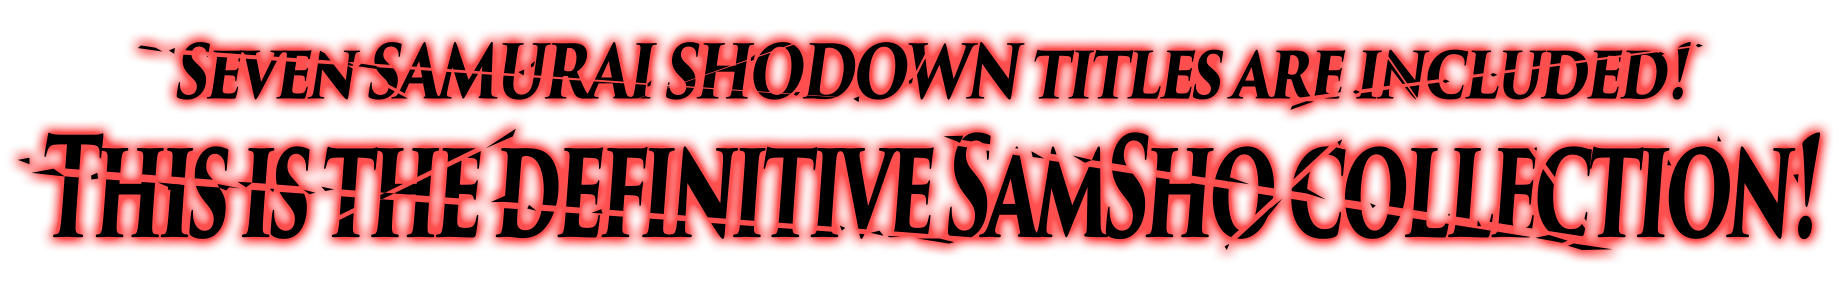 Seven SAMURAI SHODOWN titles included! This is the definitive SamSho collection!